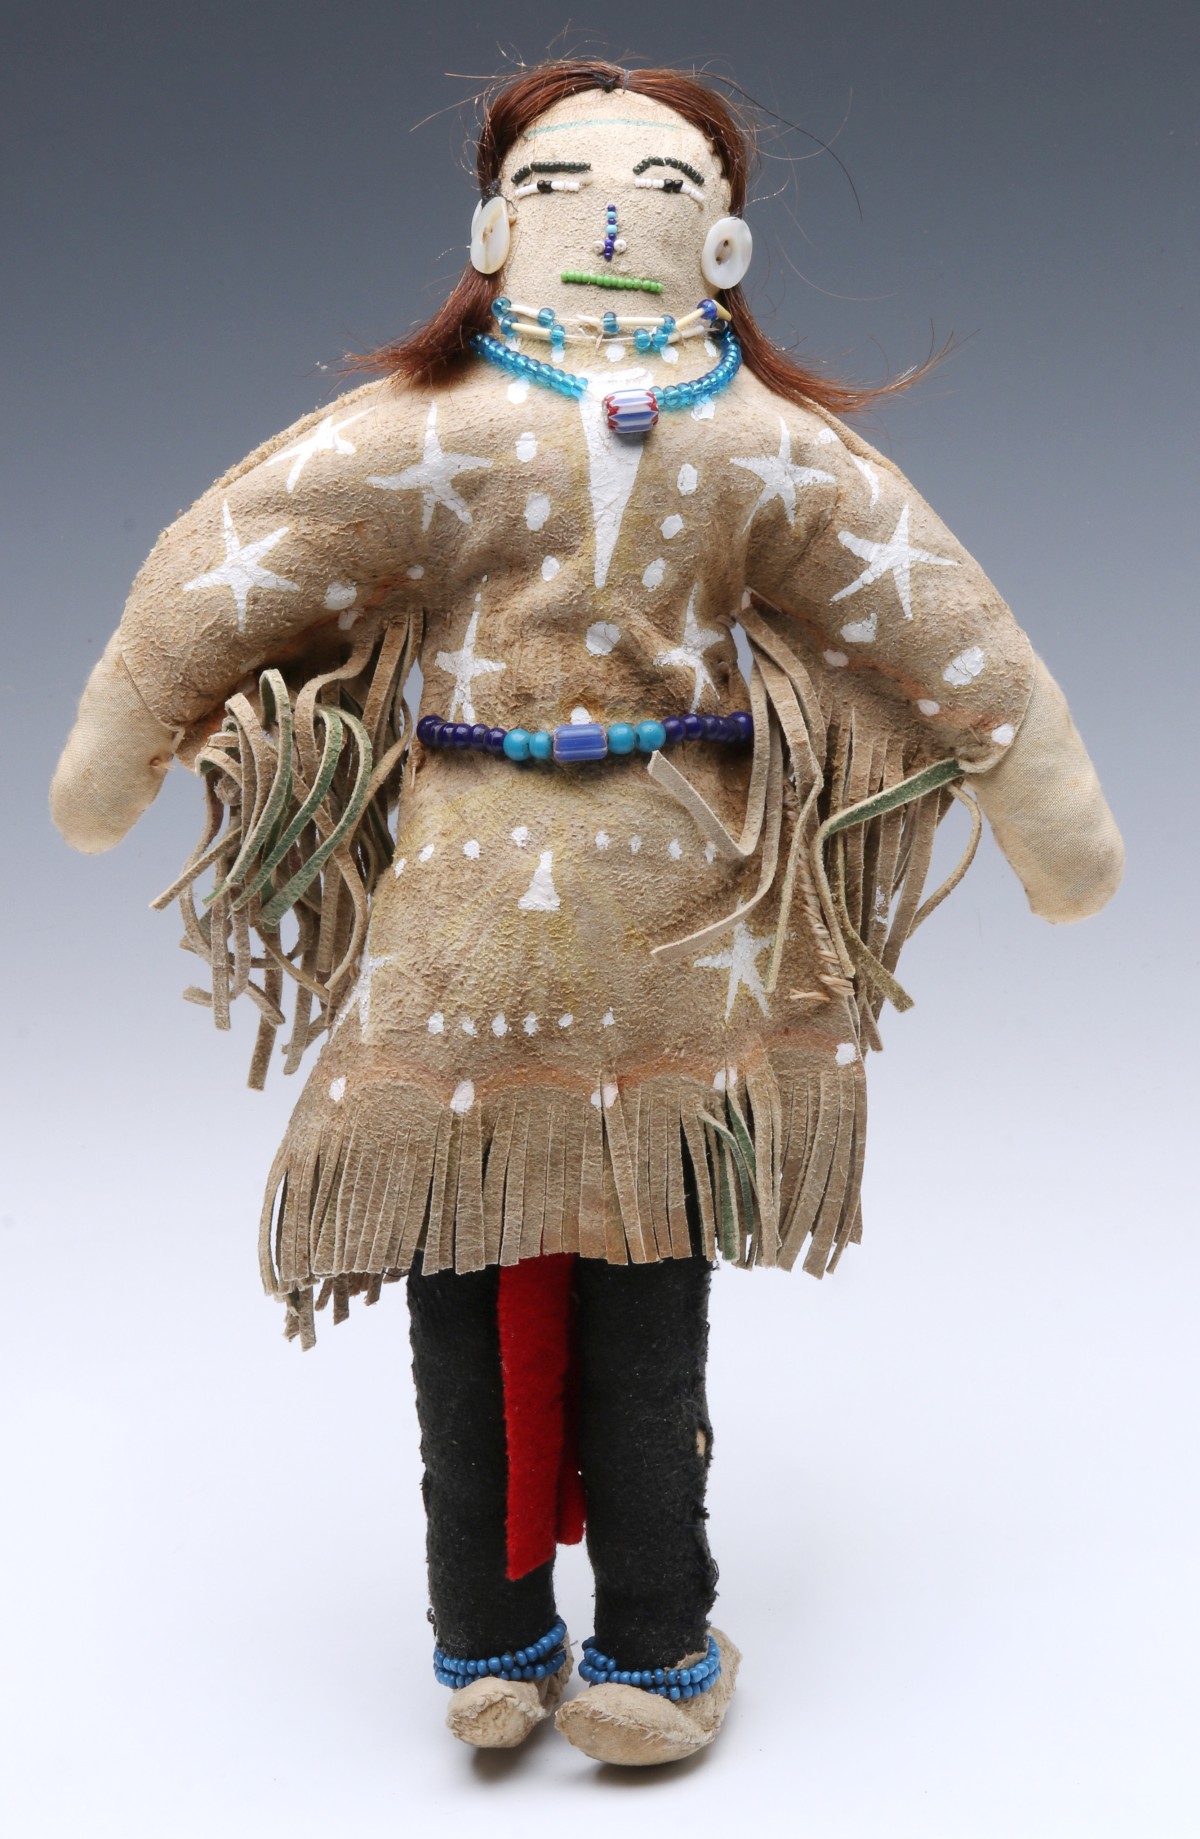 A HIDE AND CLOTH DOLL IN THE NATIVE AMERICAN STYLE